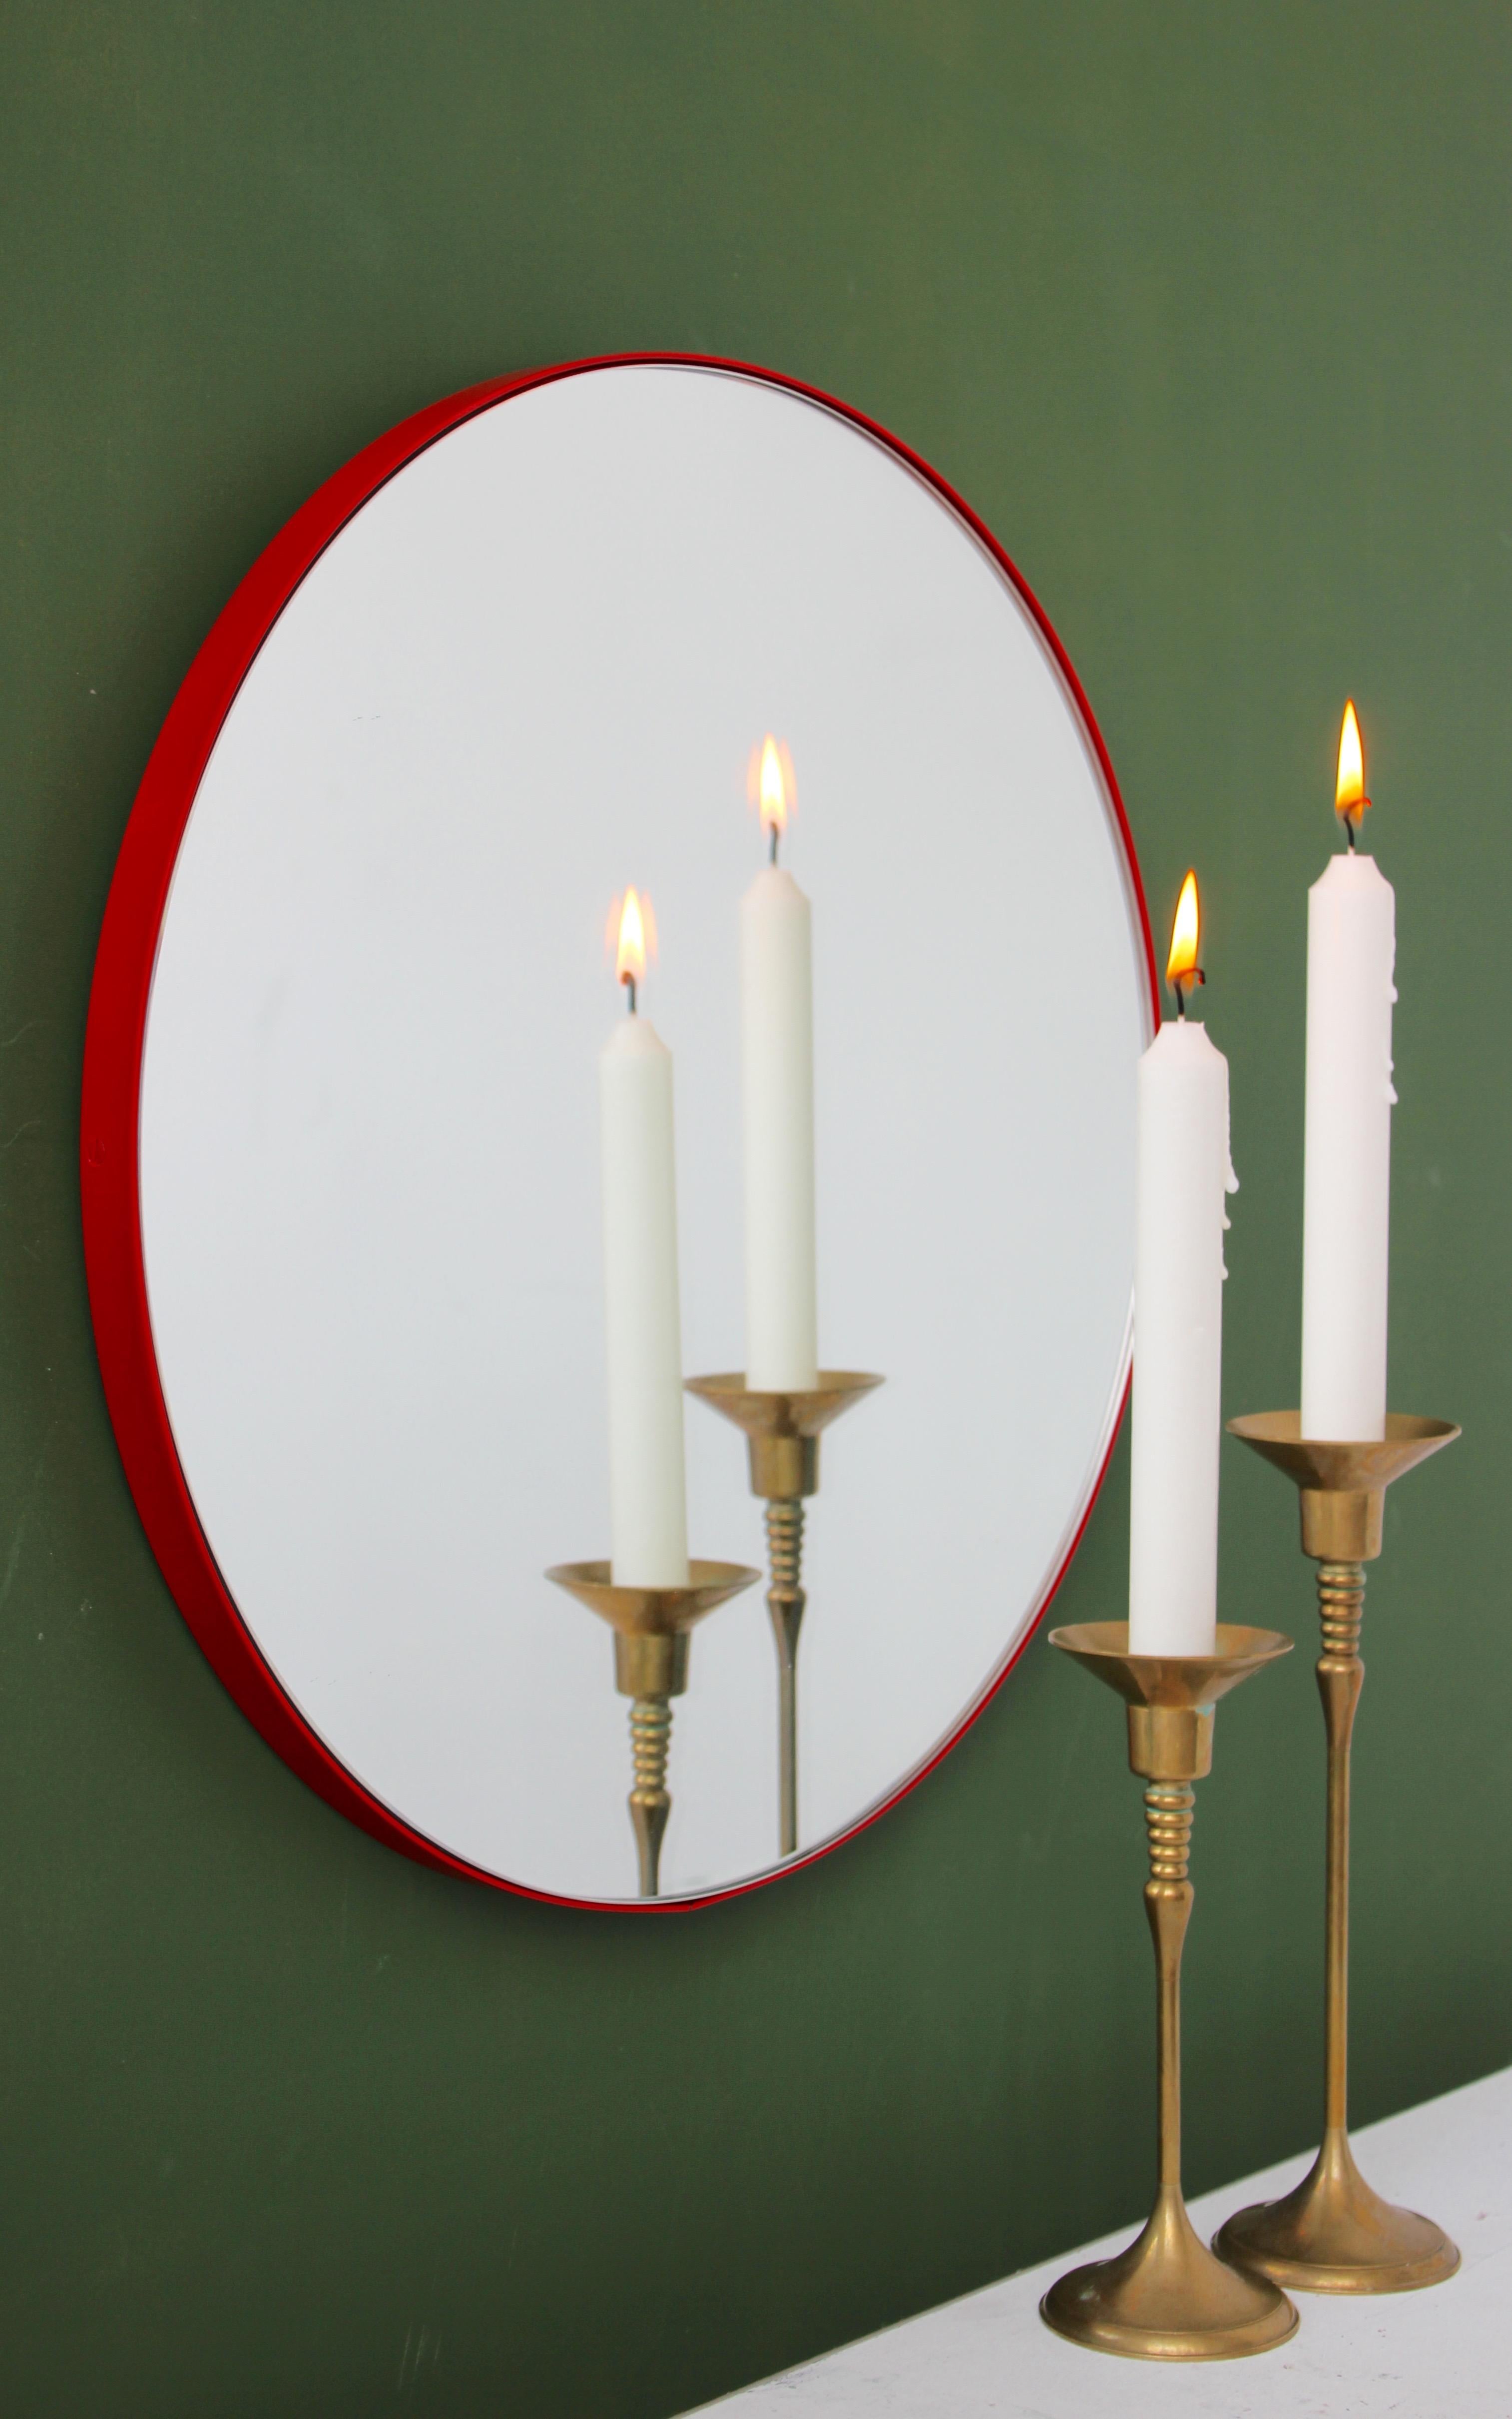 British Orbis Round Contemporary Handcrafted Mirror with Red Frame, Large For Sale